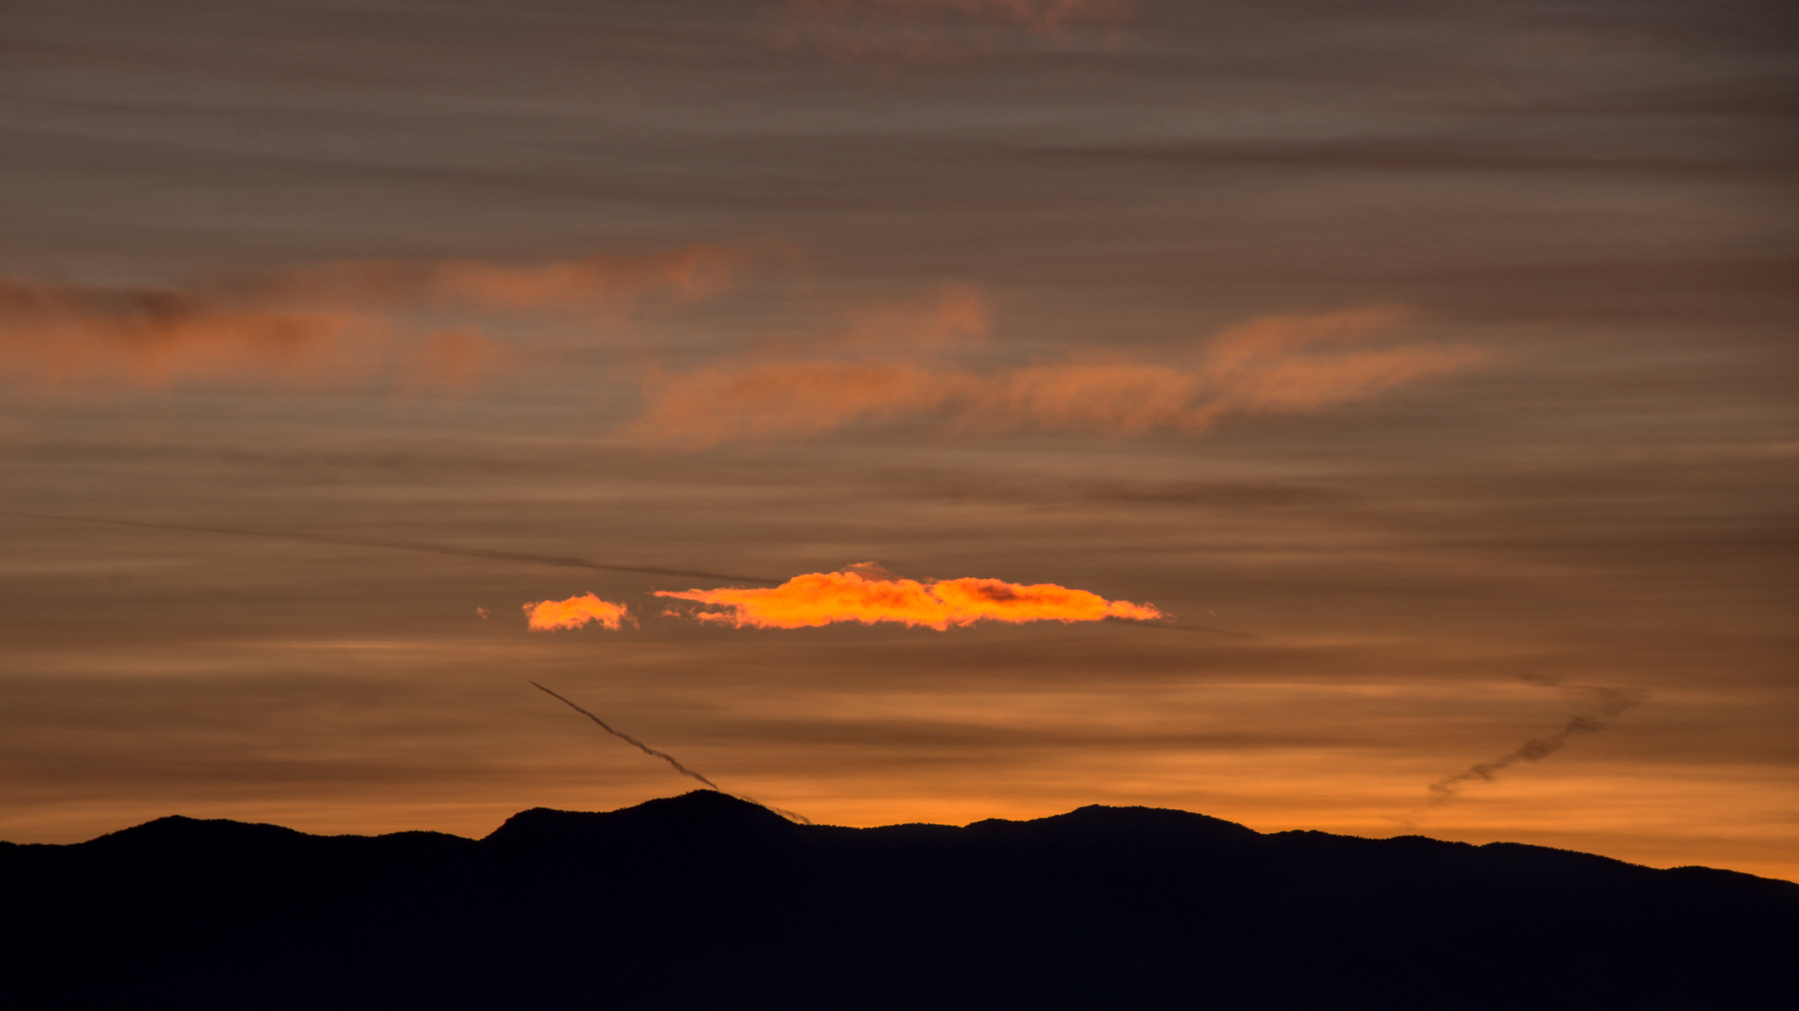 A mountain range blocks the sunrise, but clouds above it are brightly lit from behind.